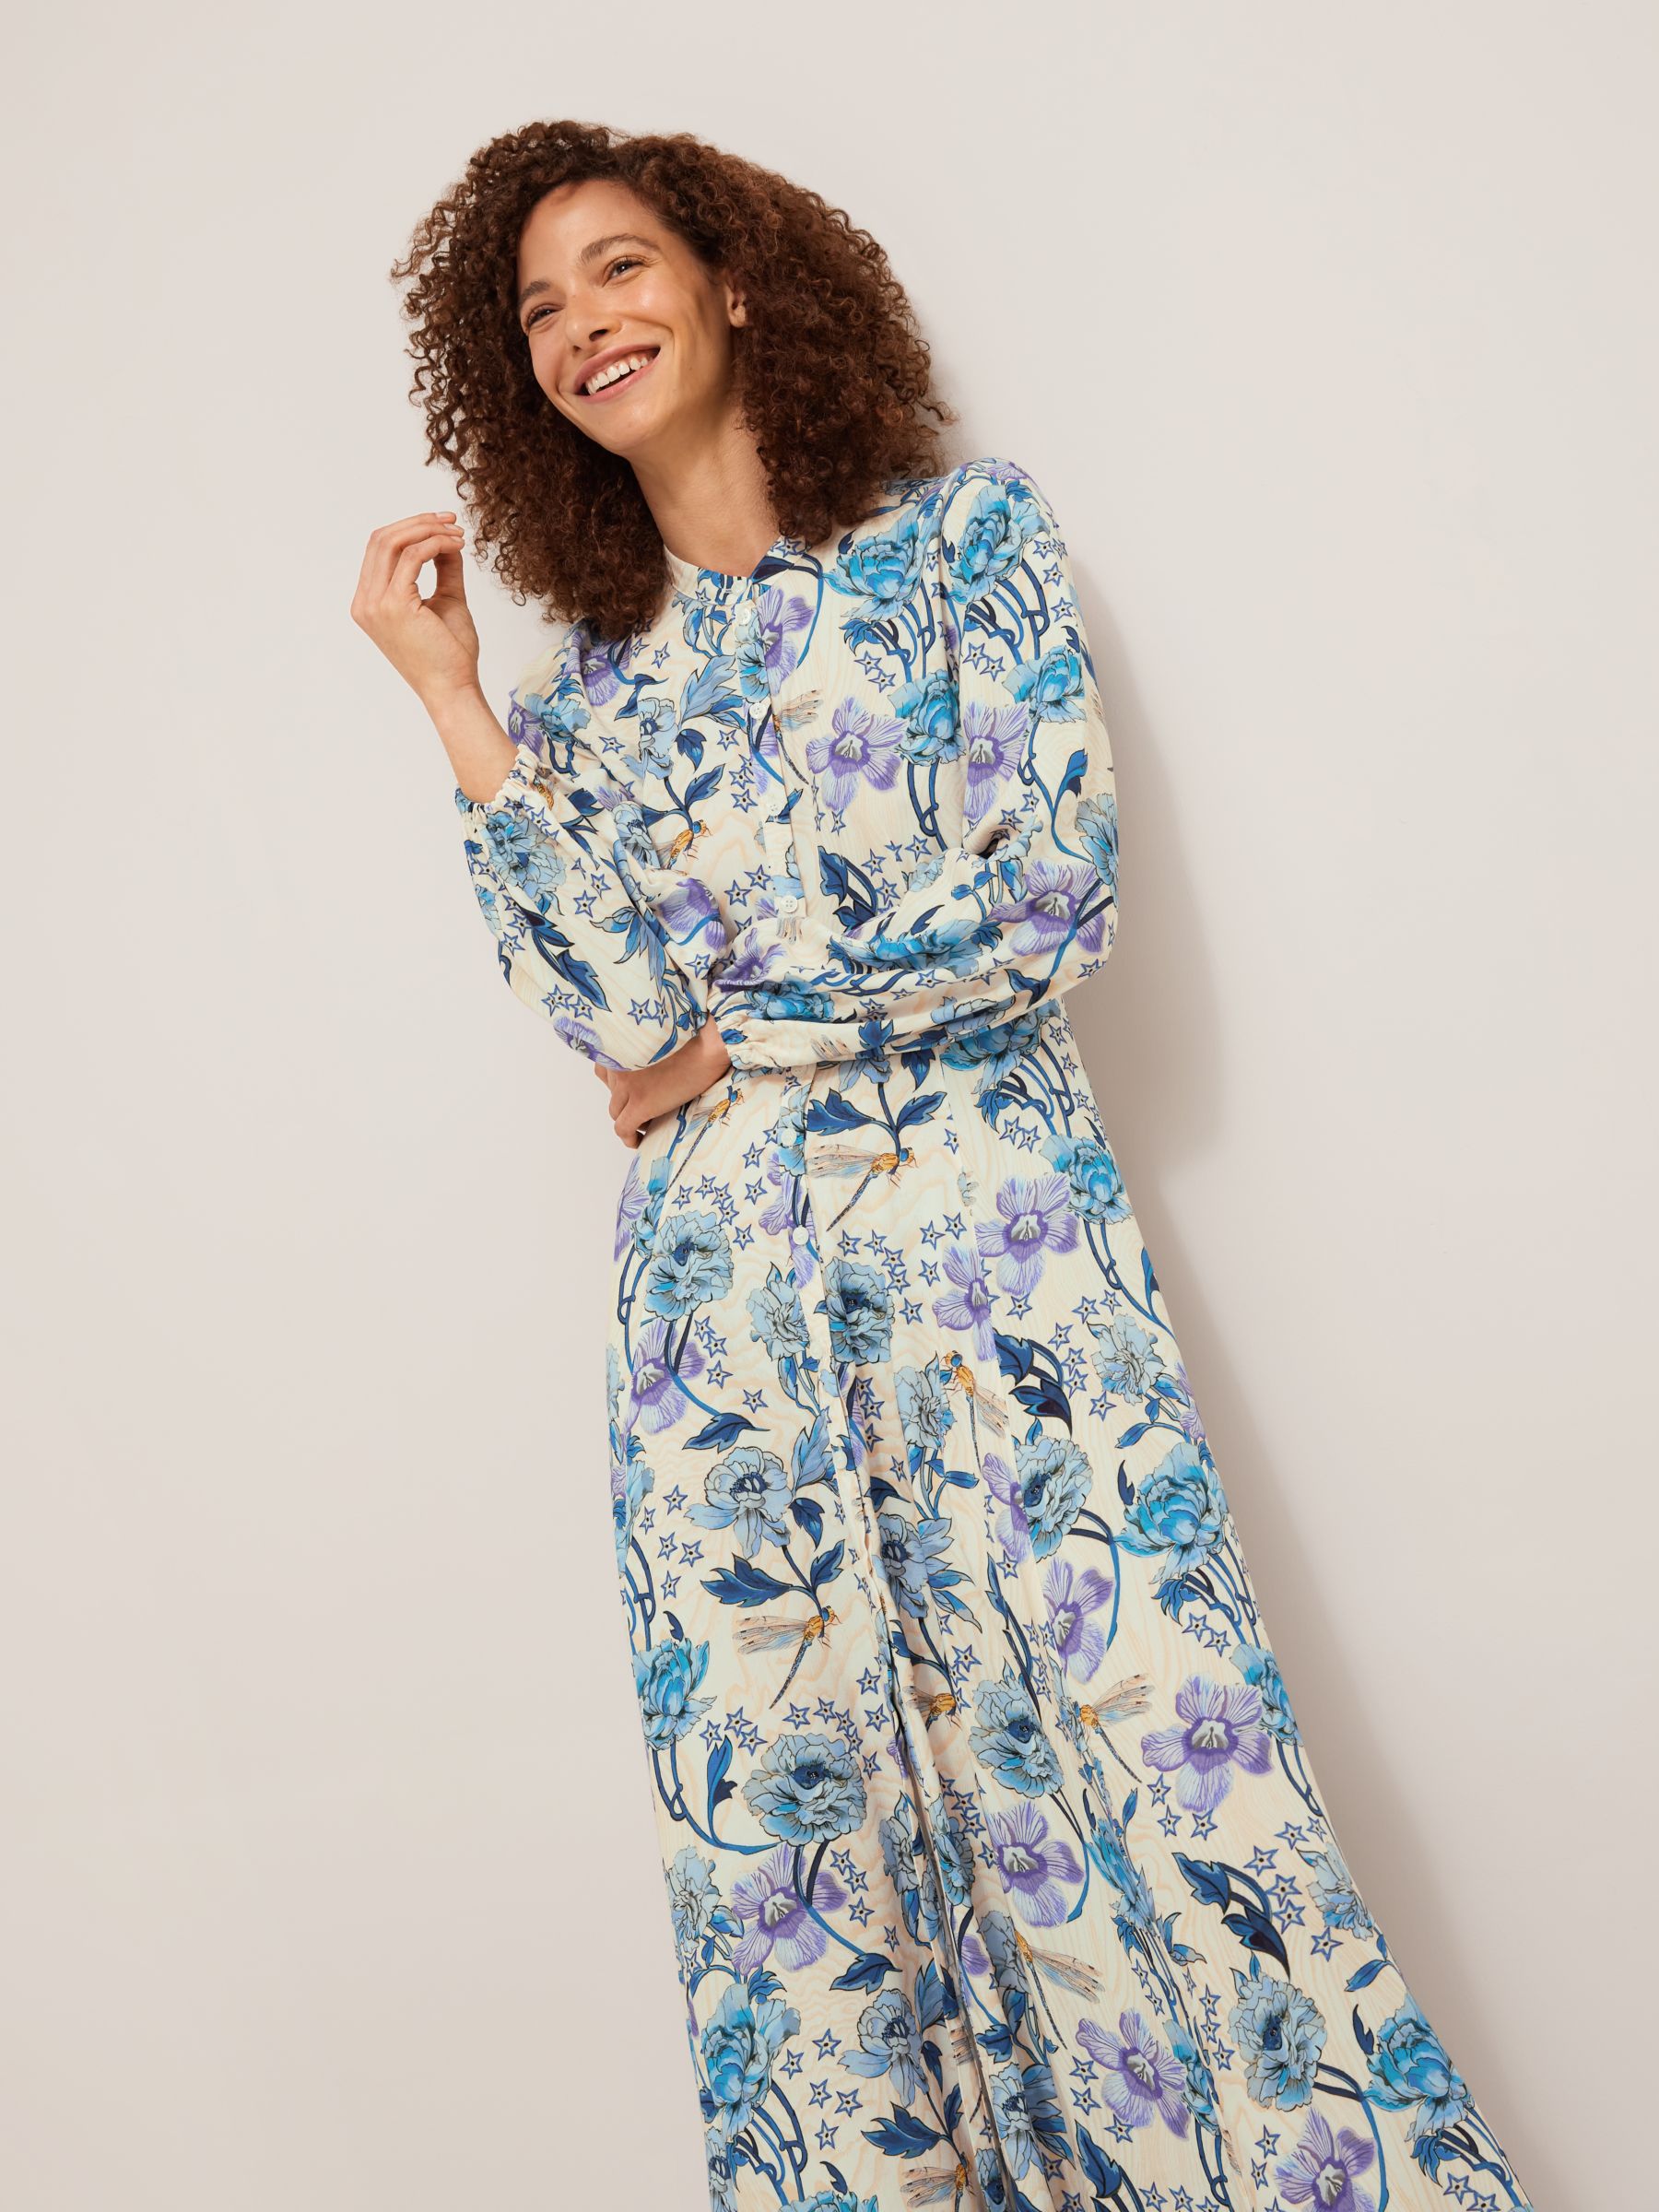 Somerset by Alice Temperley Star Floral Maxi Dress, Navy at John Lewis & Partners